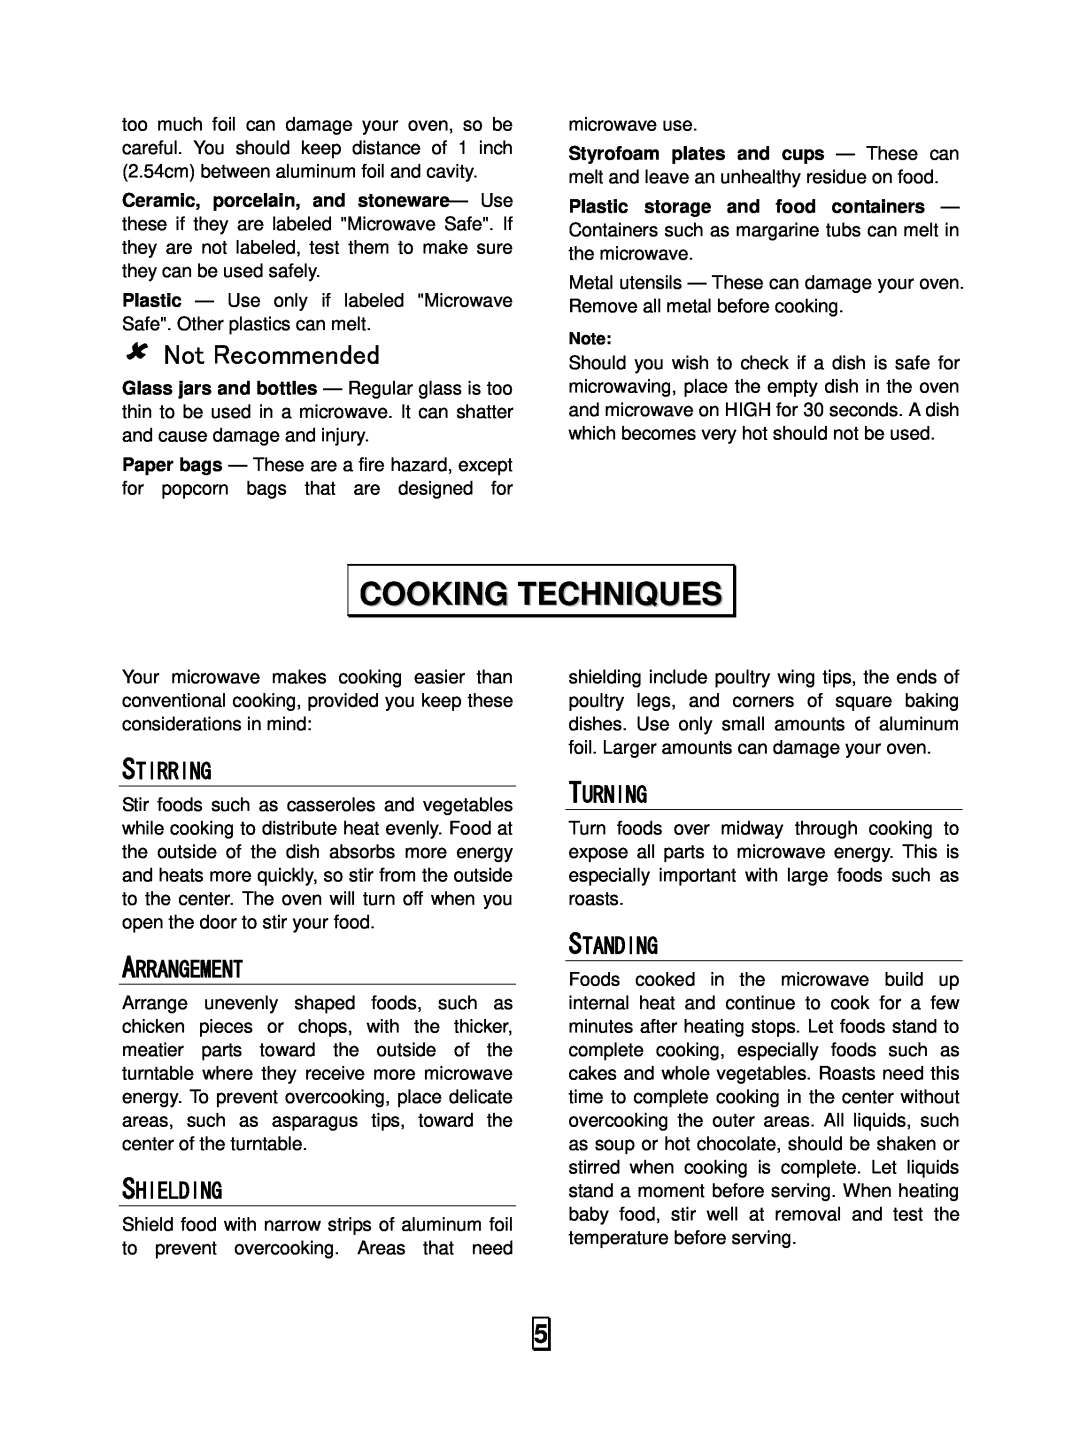 RCA RMW948 owner manual Cooking Techniques, 8Not Recommended, Stirring, Arrangement, Shielding, Turning, Standing 